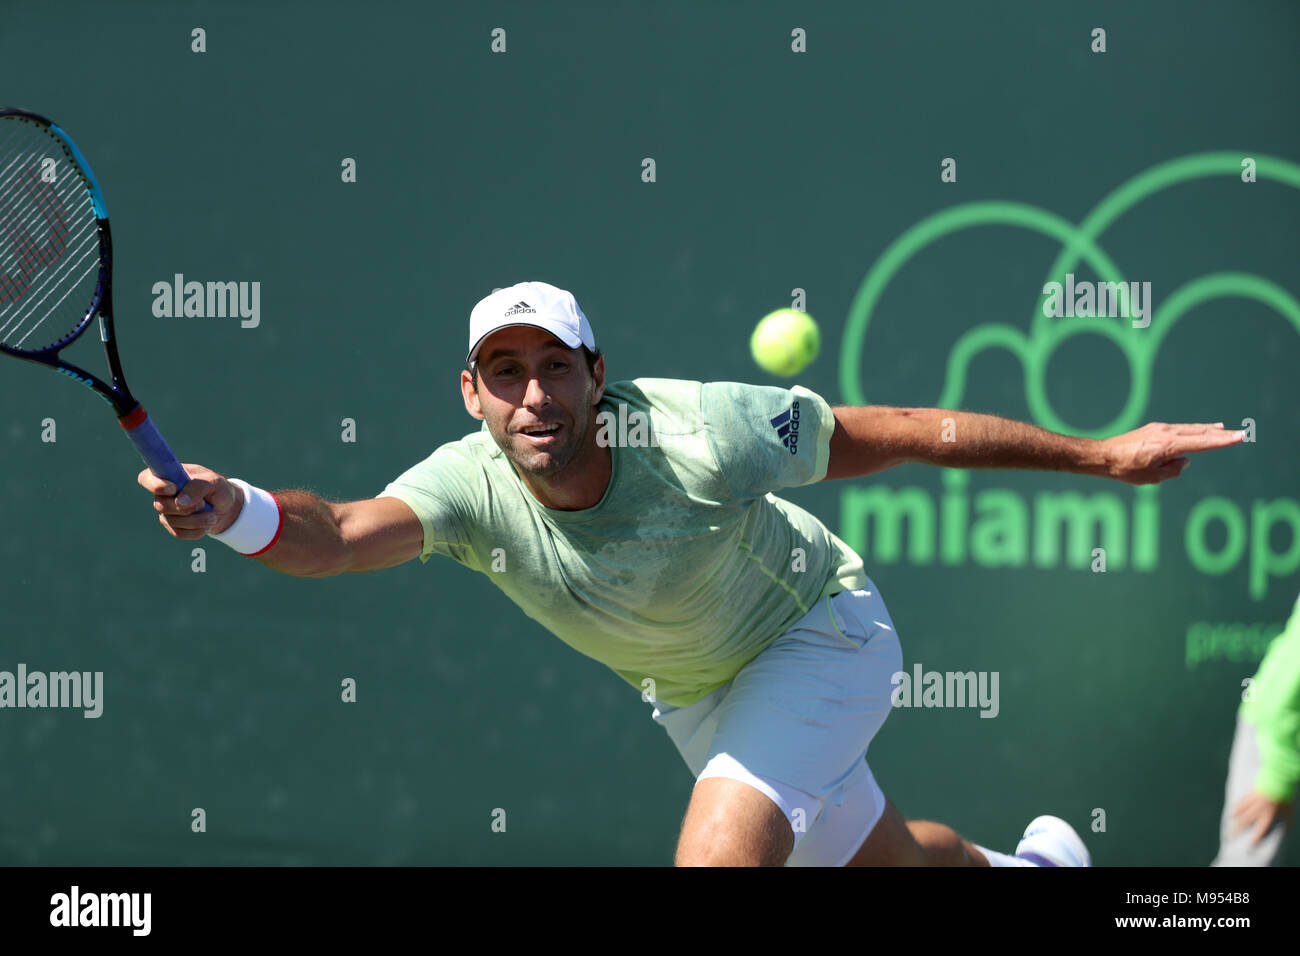 KEY BISCAYNE, FL - MARCH 22: Fernando Verdasco during Day 4 of the Miami Open at the Crandon Park Tennis Center. Alexander 'Sascha' Zverev Jr. is a German professional tennis player. He is currently the youngest player in the ATP top 30. Zverev finished the 2017 season ranked world No. 4 on March 22, 2018 in Key Biscayne, Florida   People:  Fernando Verdasco Stock Photo